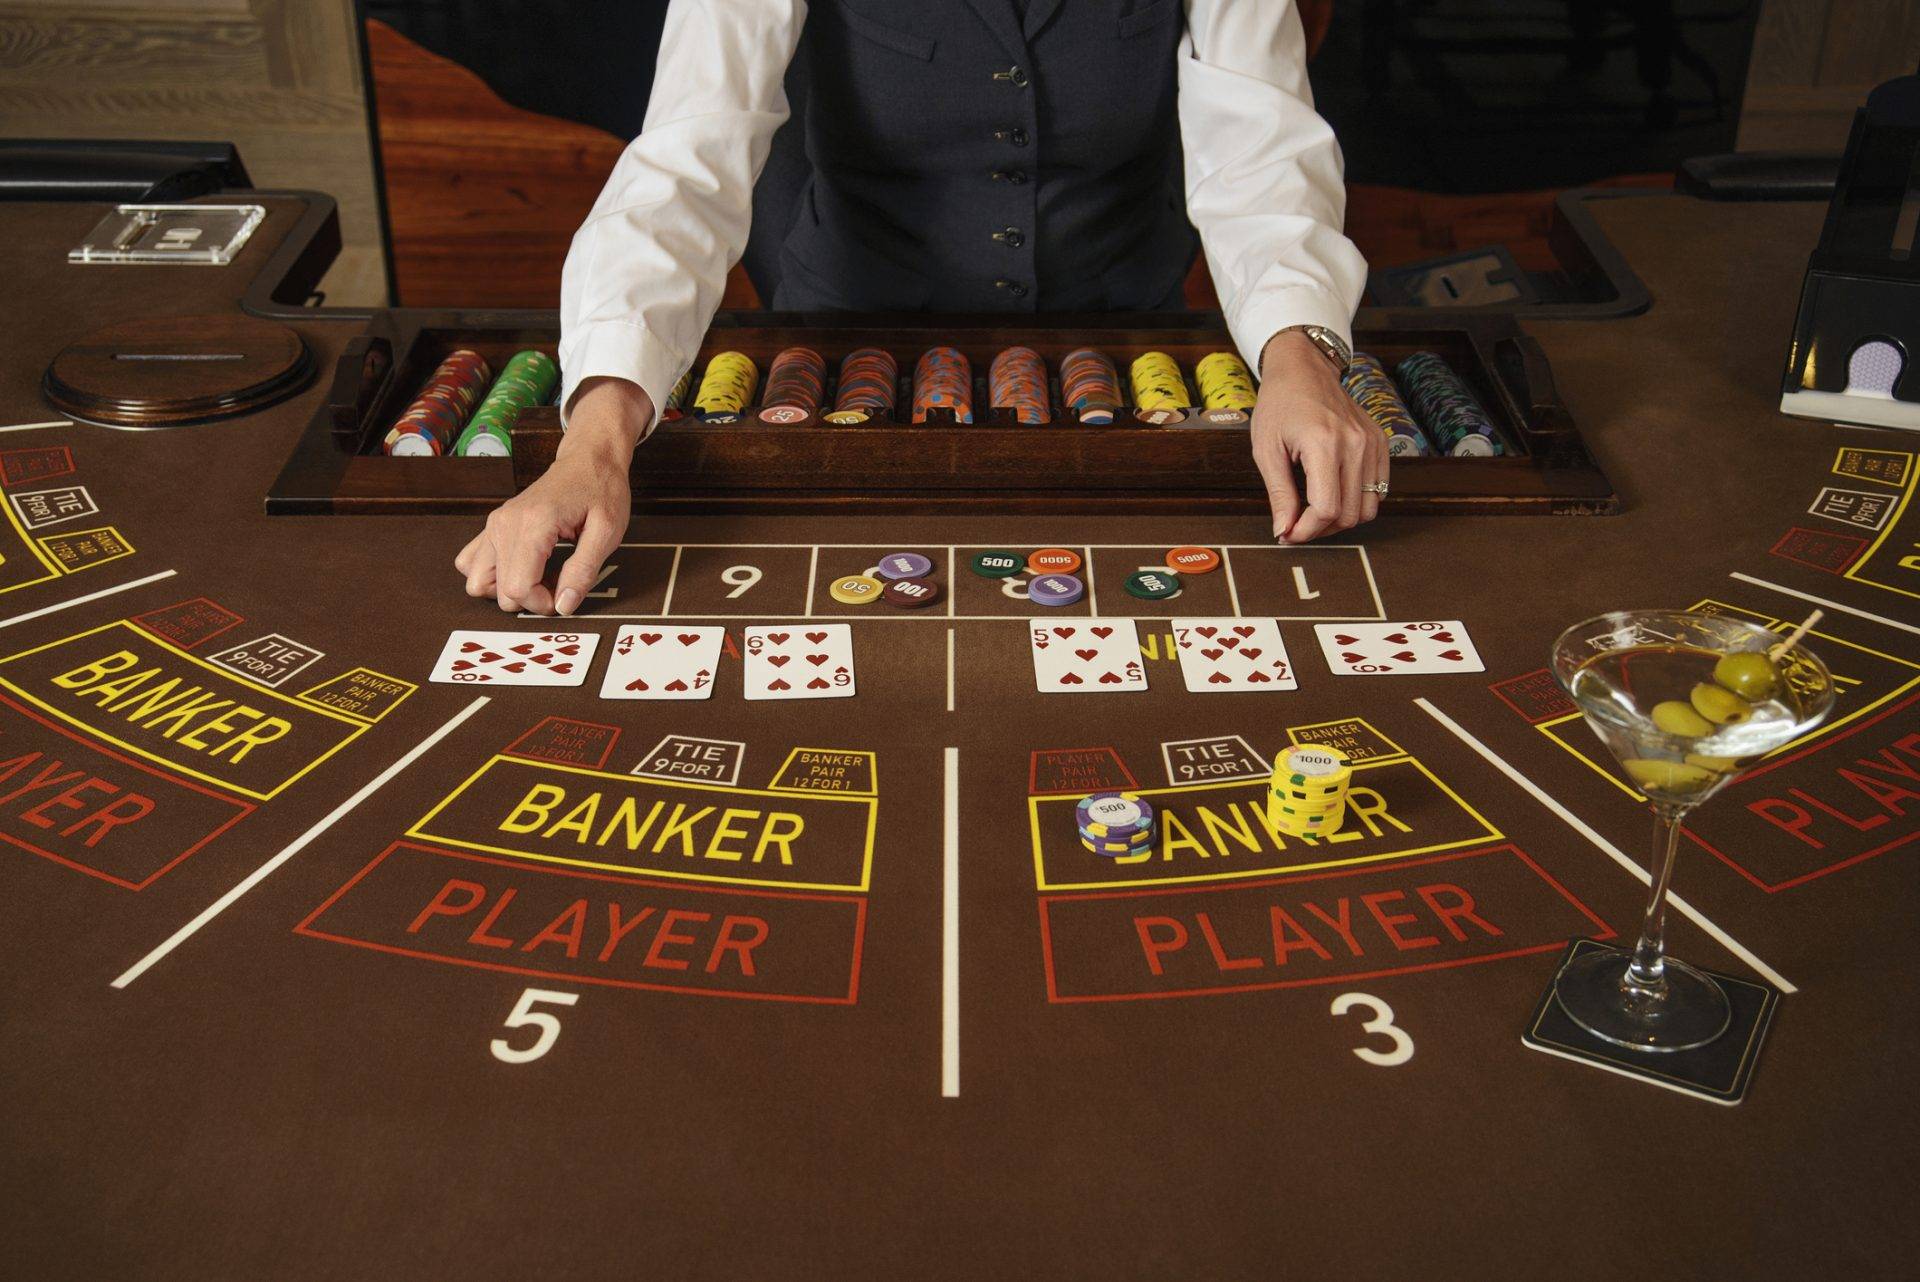 With the tutorial videos, you will win money in Baccarat online